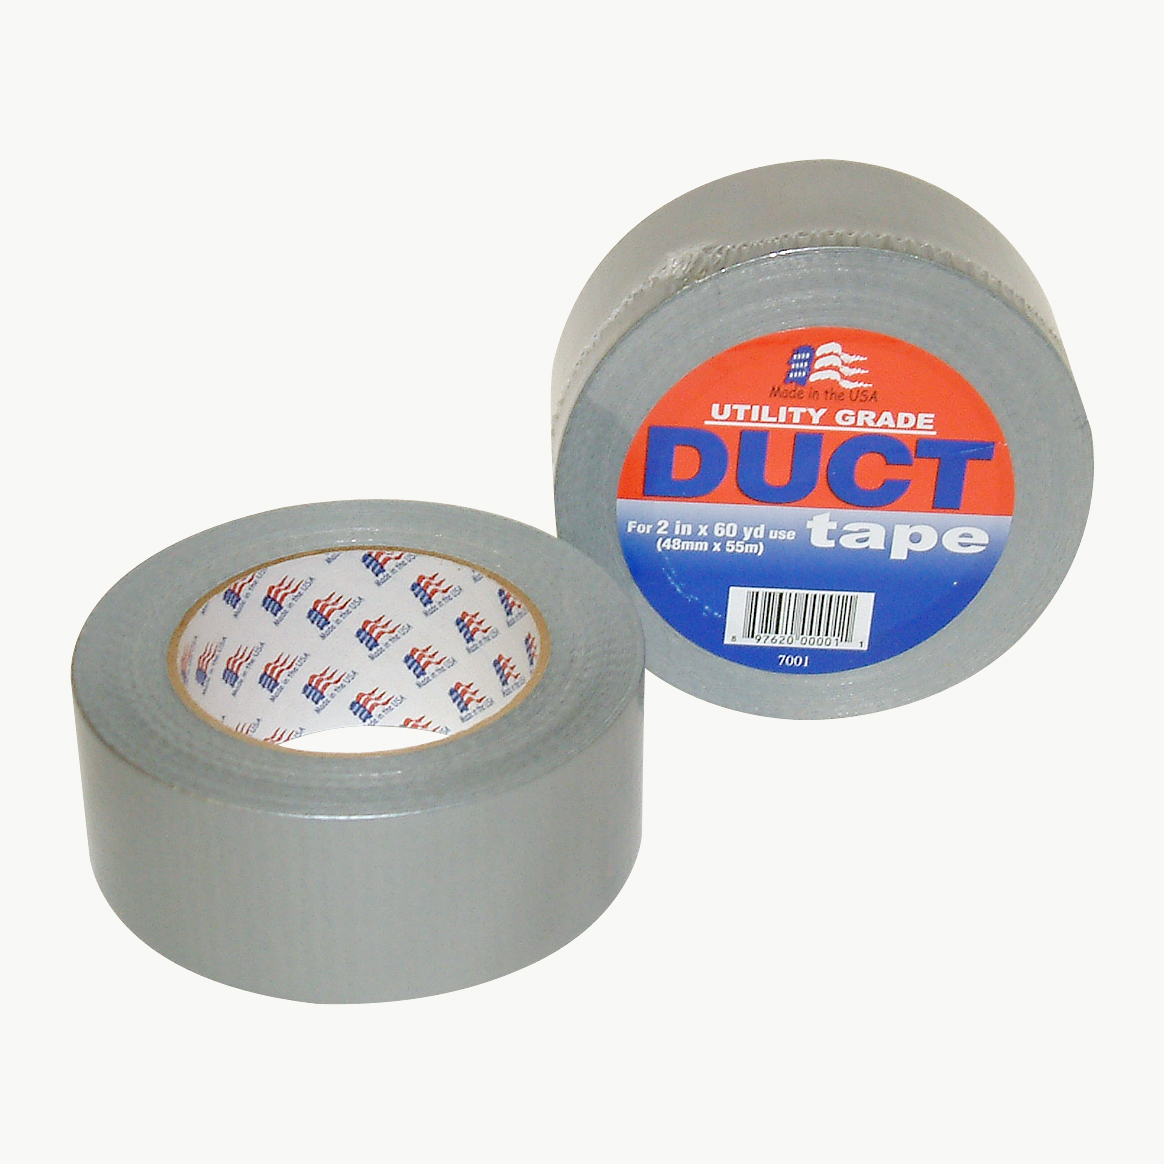 JVCC PATRIOT-1 Utility Grade Duct Tape